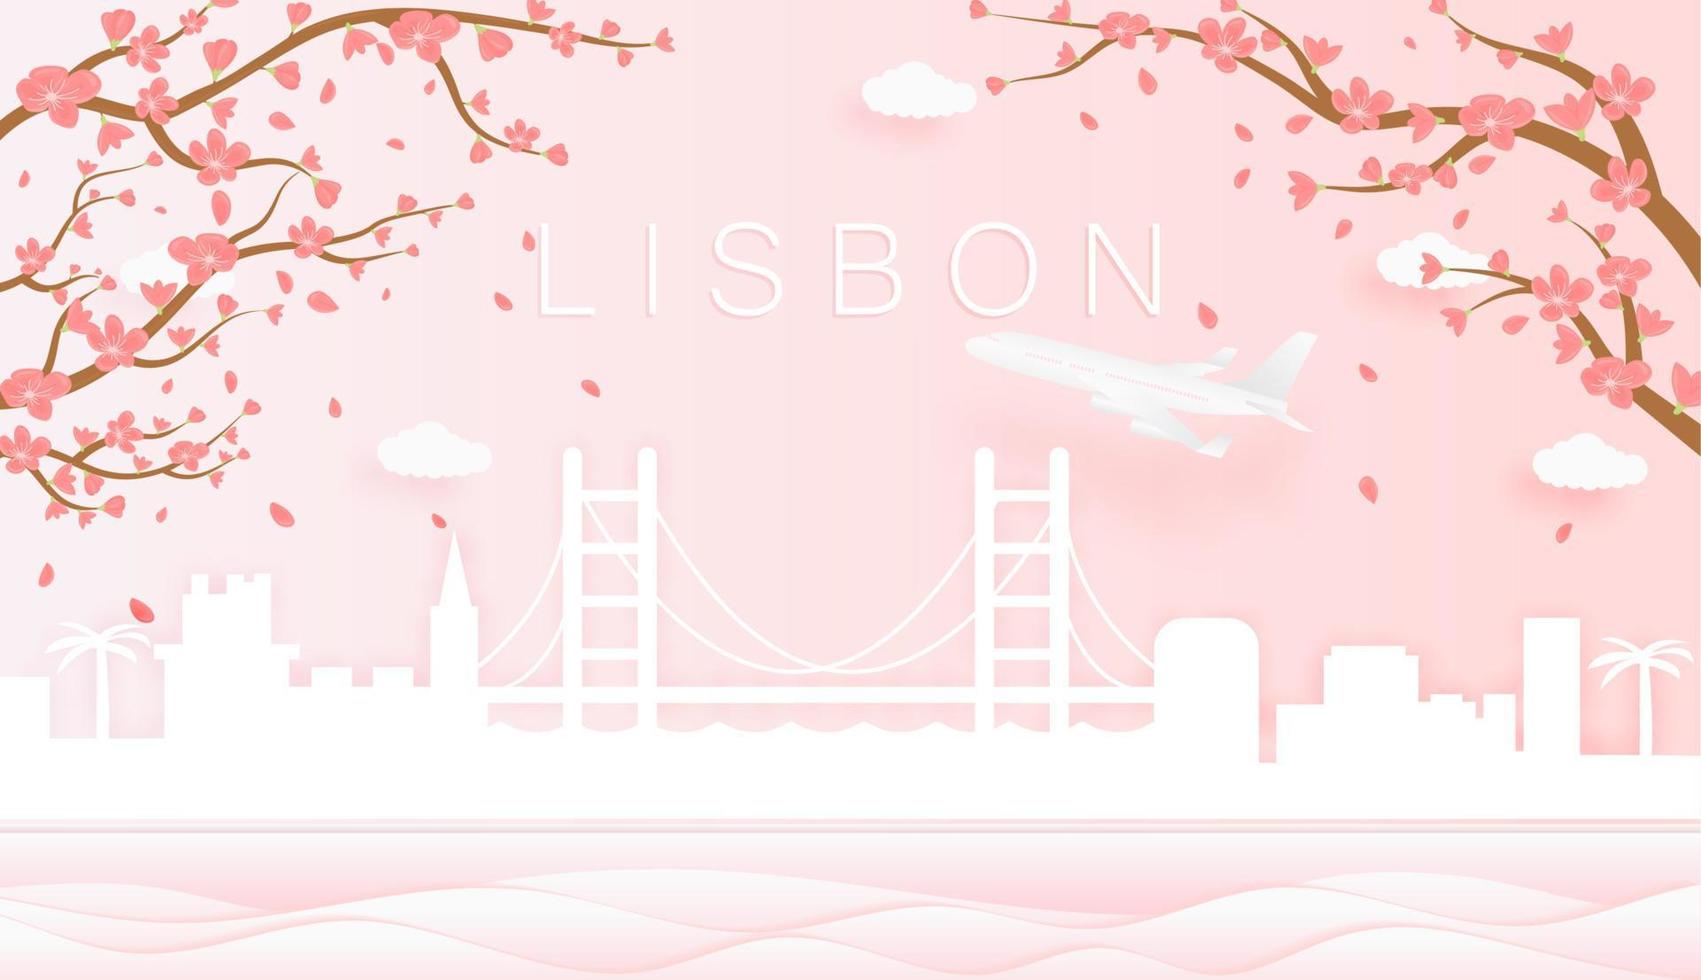 Panorama travel postcard, poster, tour advertising of world famous landmarks of Lisbon, spring season with blooming flowers in tree in paper cut style vector